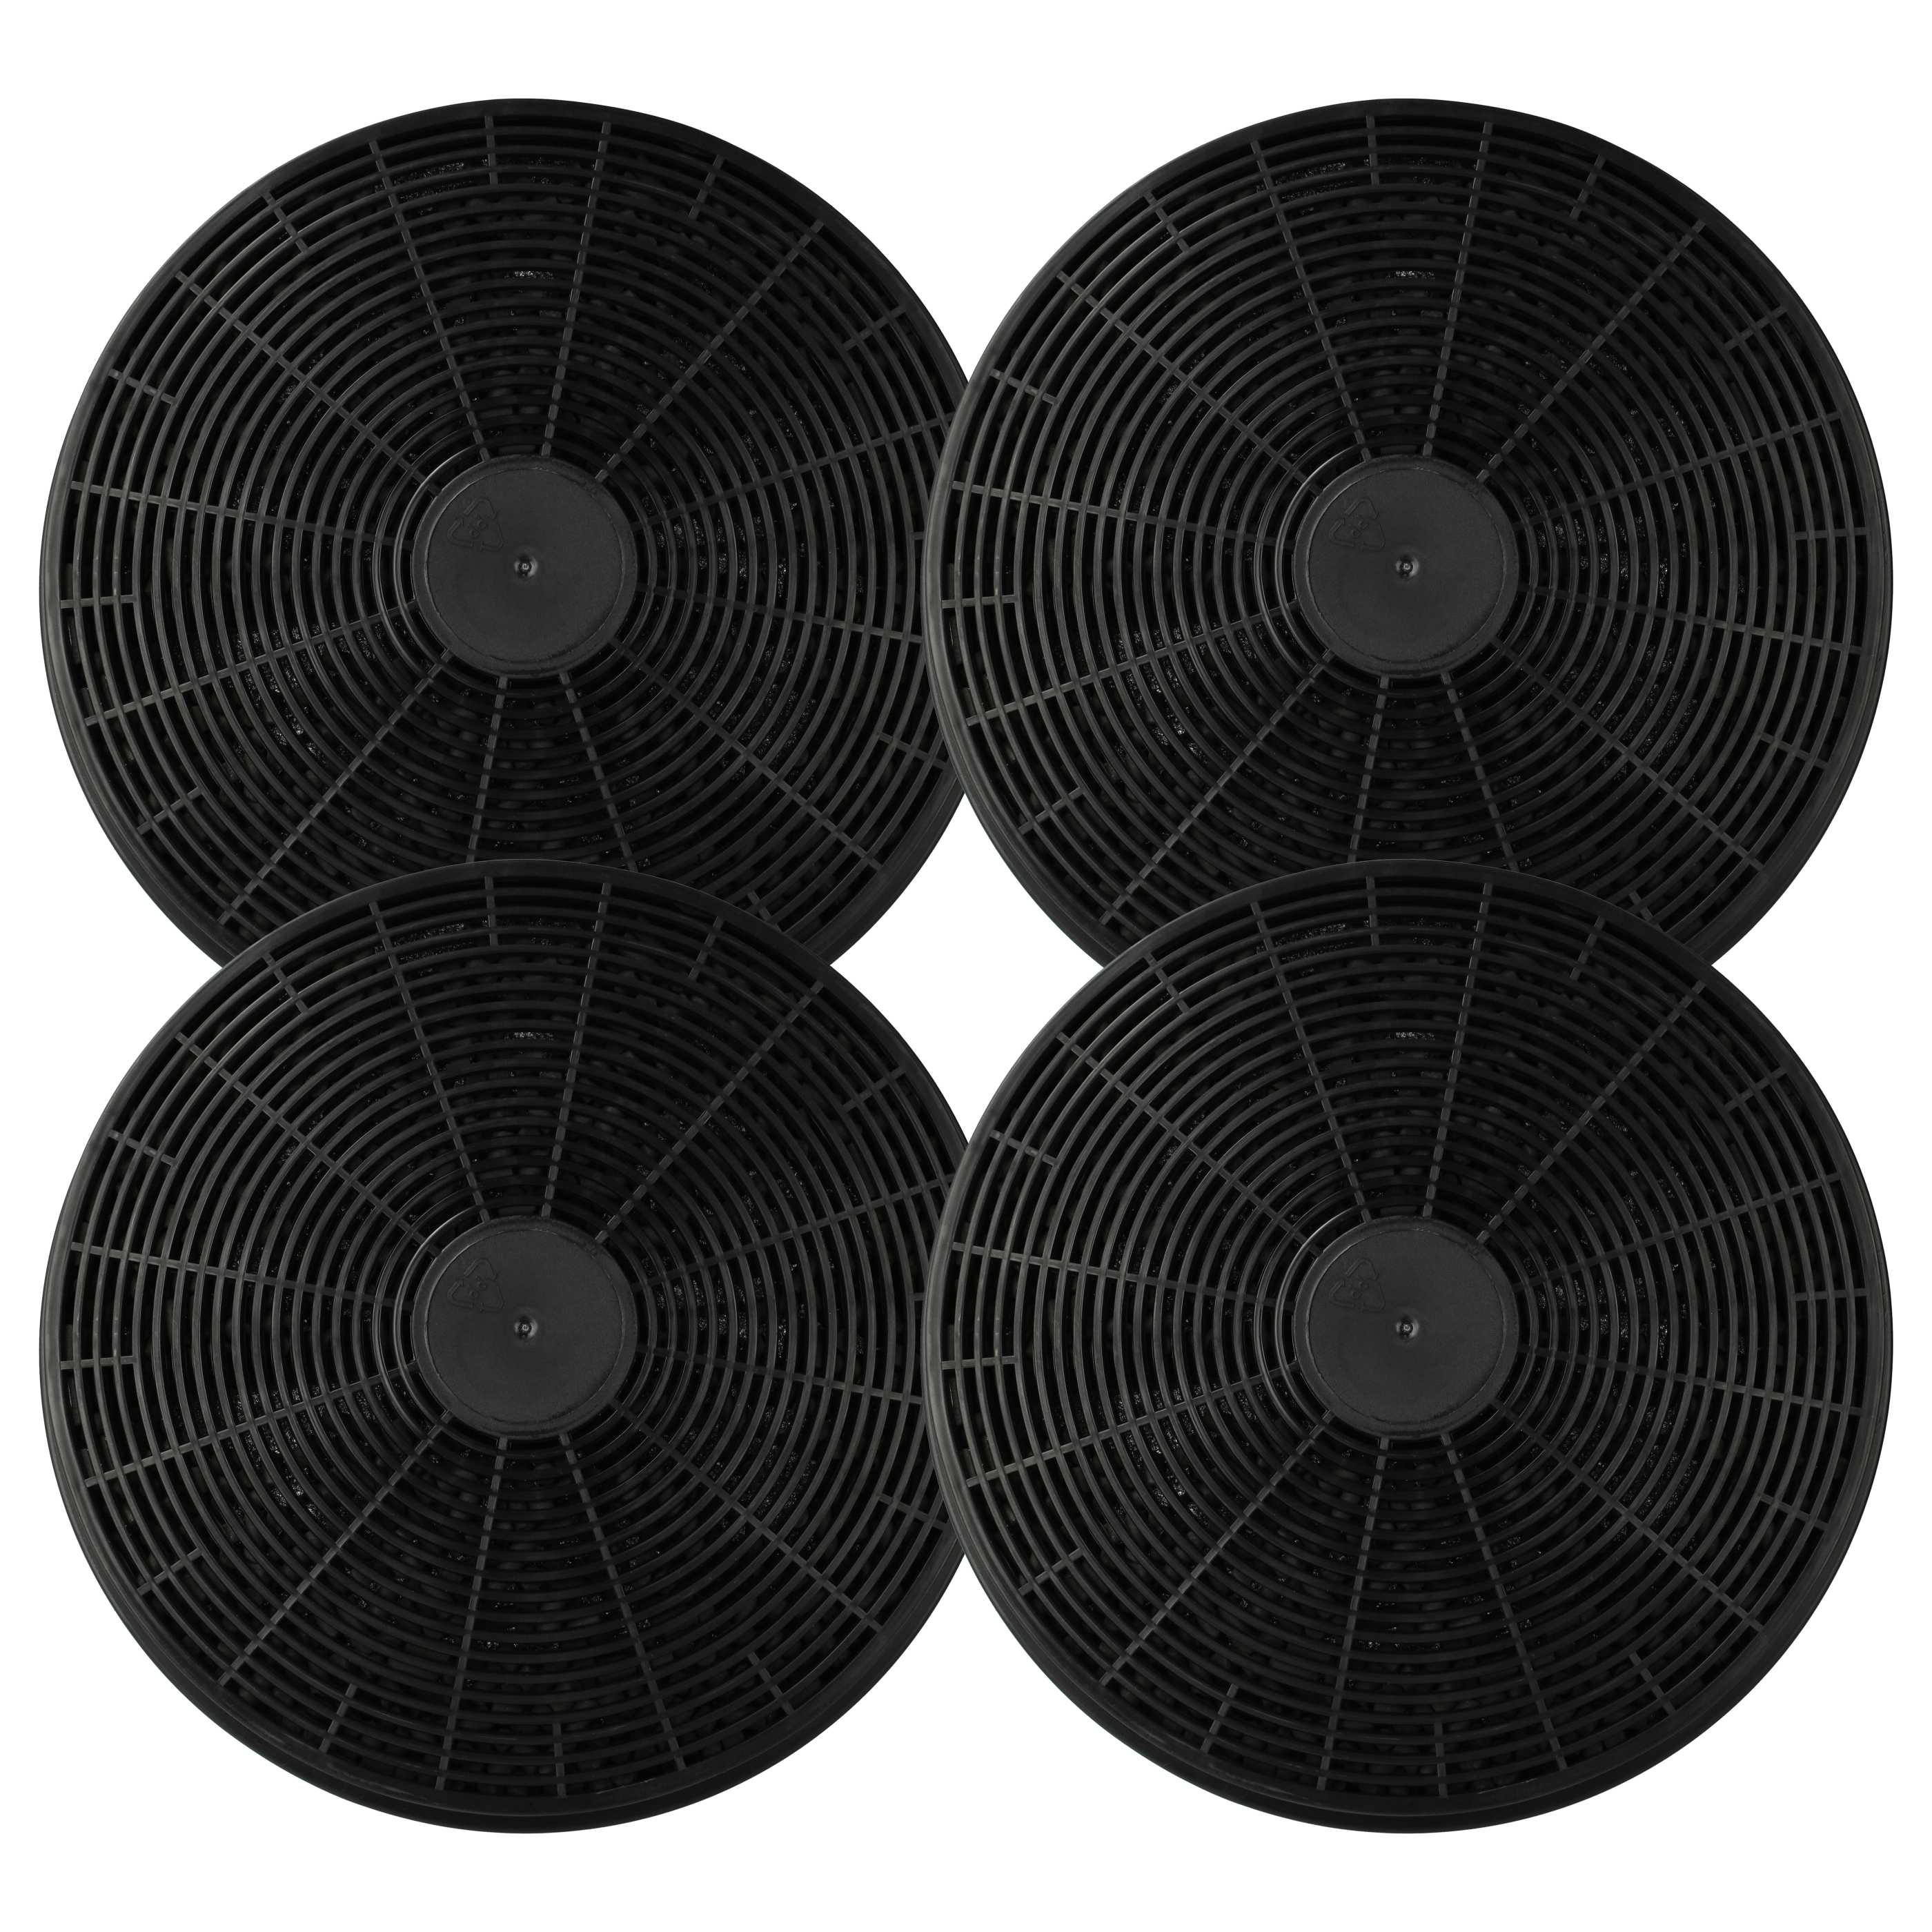 4x Activated Carbon Filter as Replacement for Bomann KF561 for Bomann Hob etc. - 17.5 cm